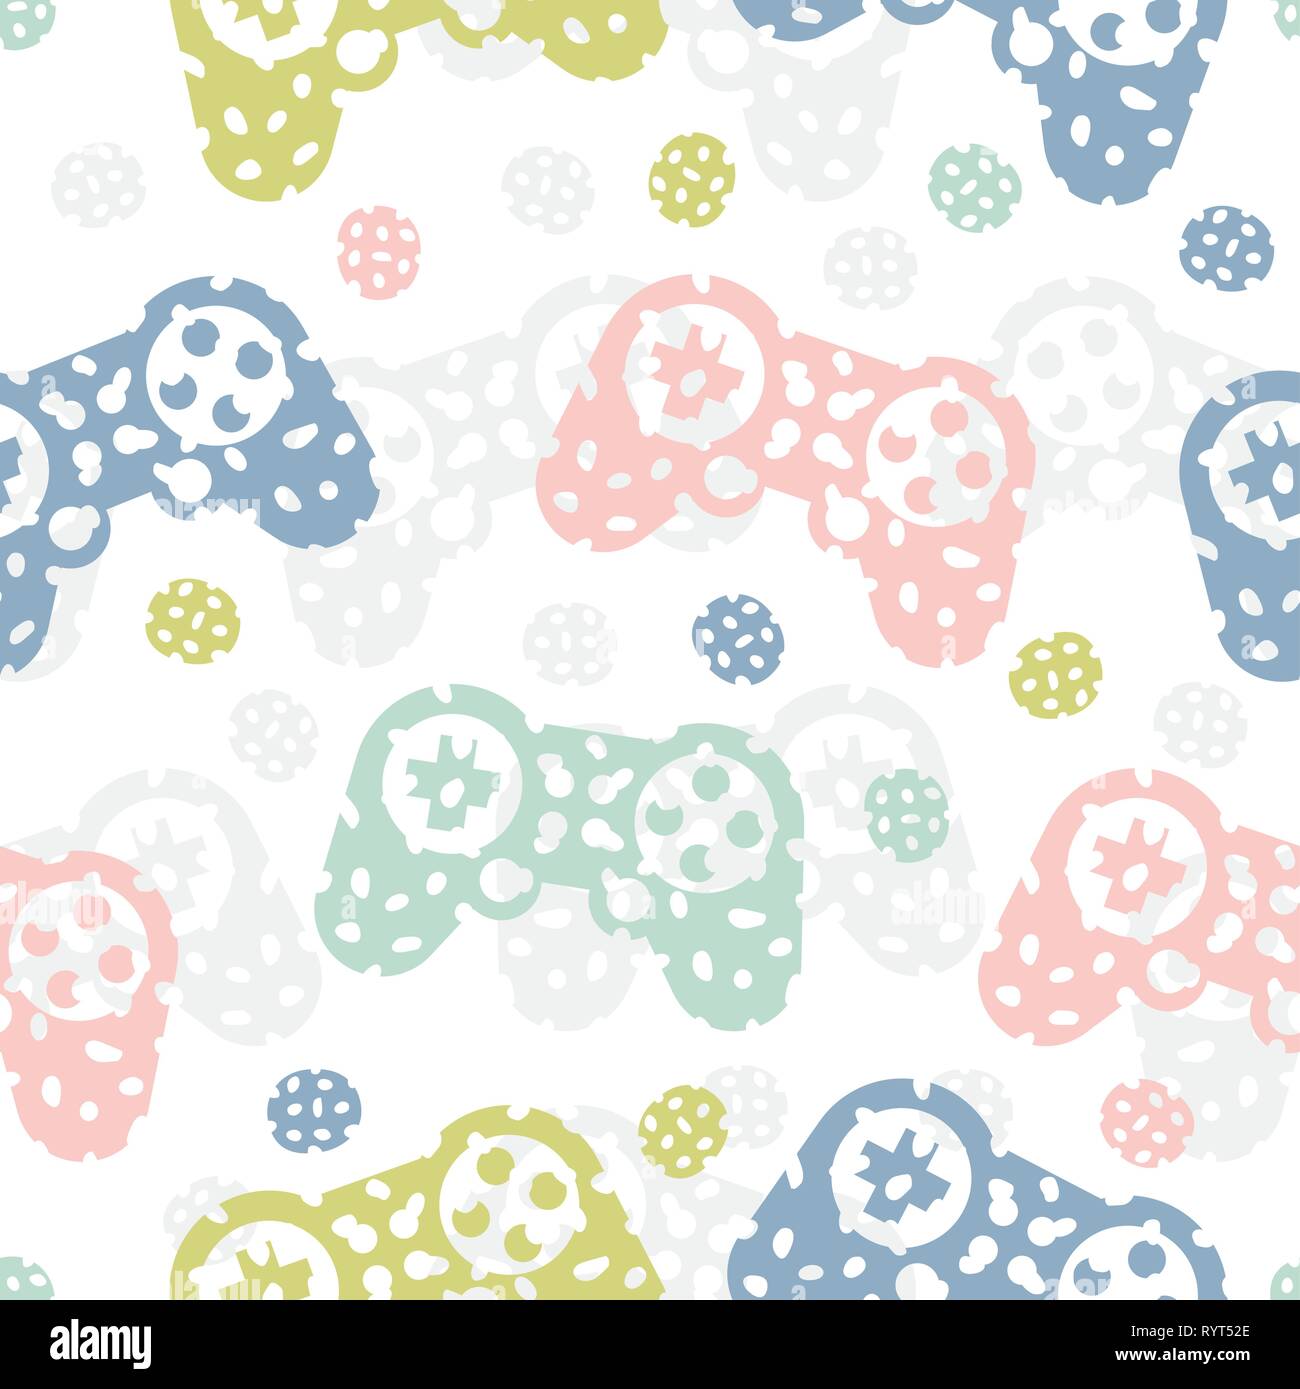 Seamless pattern with game controller Abstract background Stock Vector